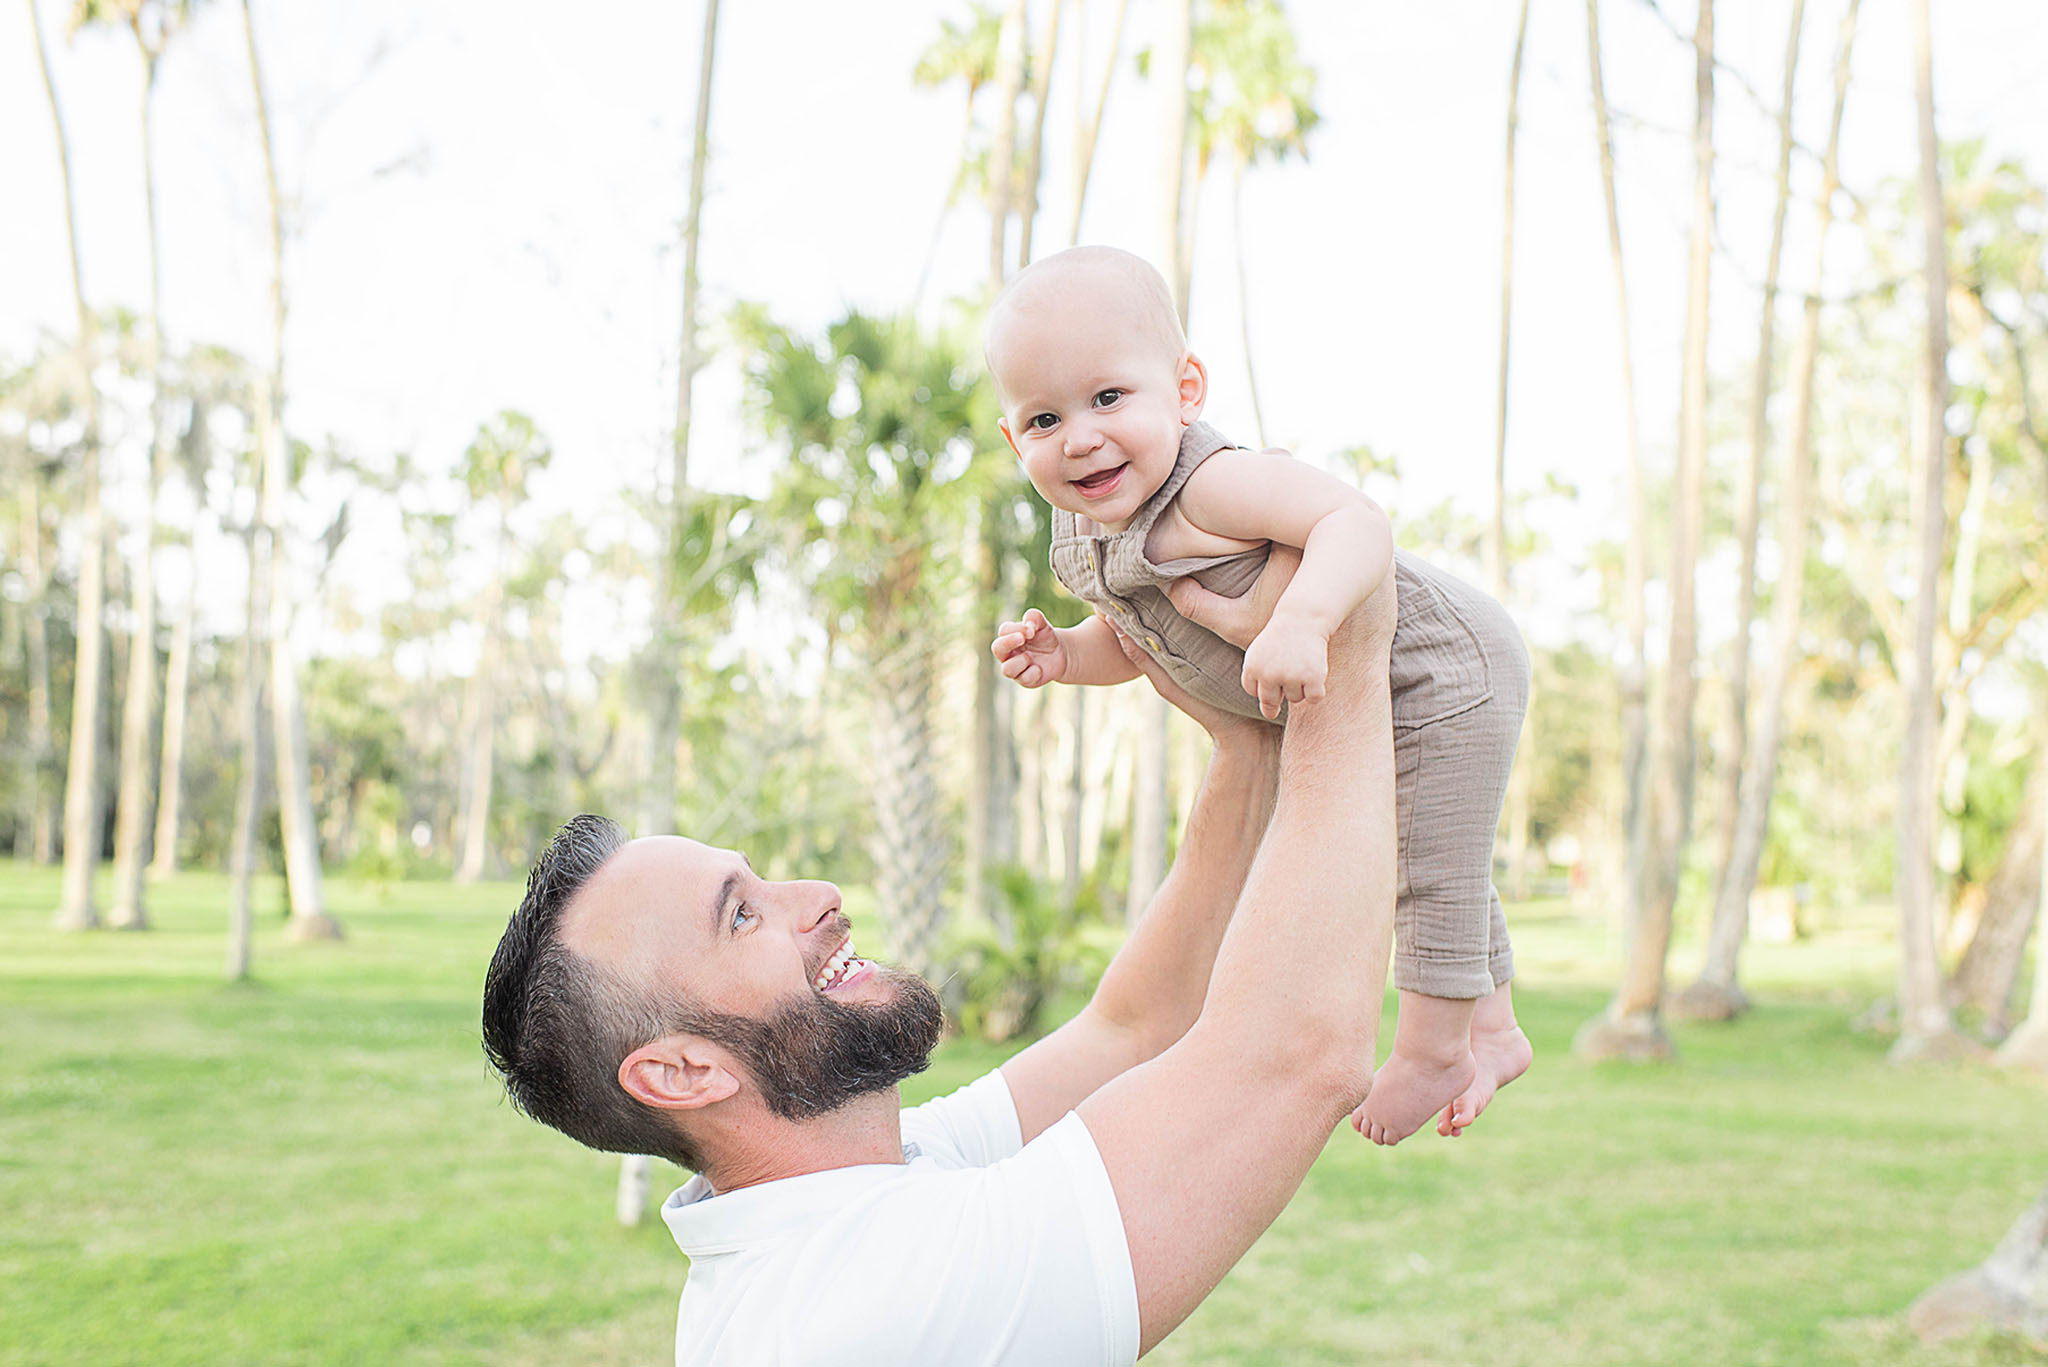 A father lifts his infant son wearing brown overalls over his head while playing in a grassy field jacksonville nannies